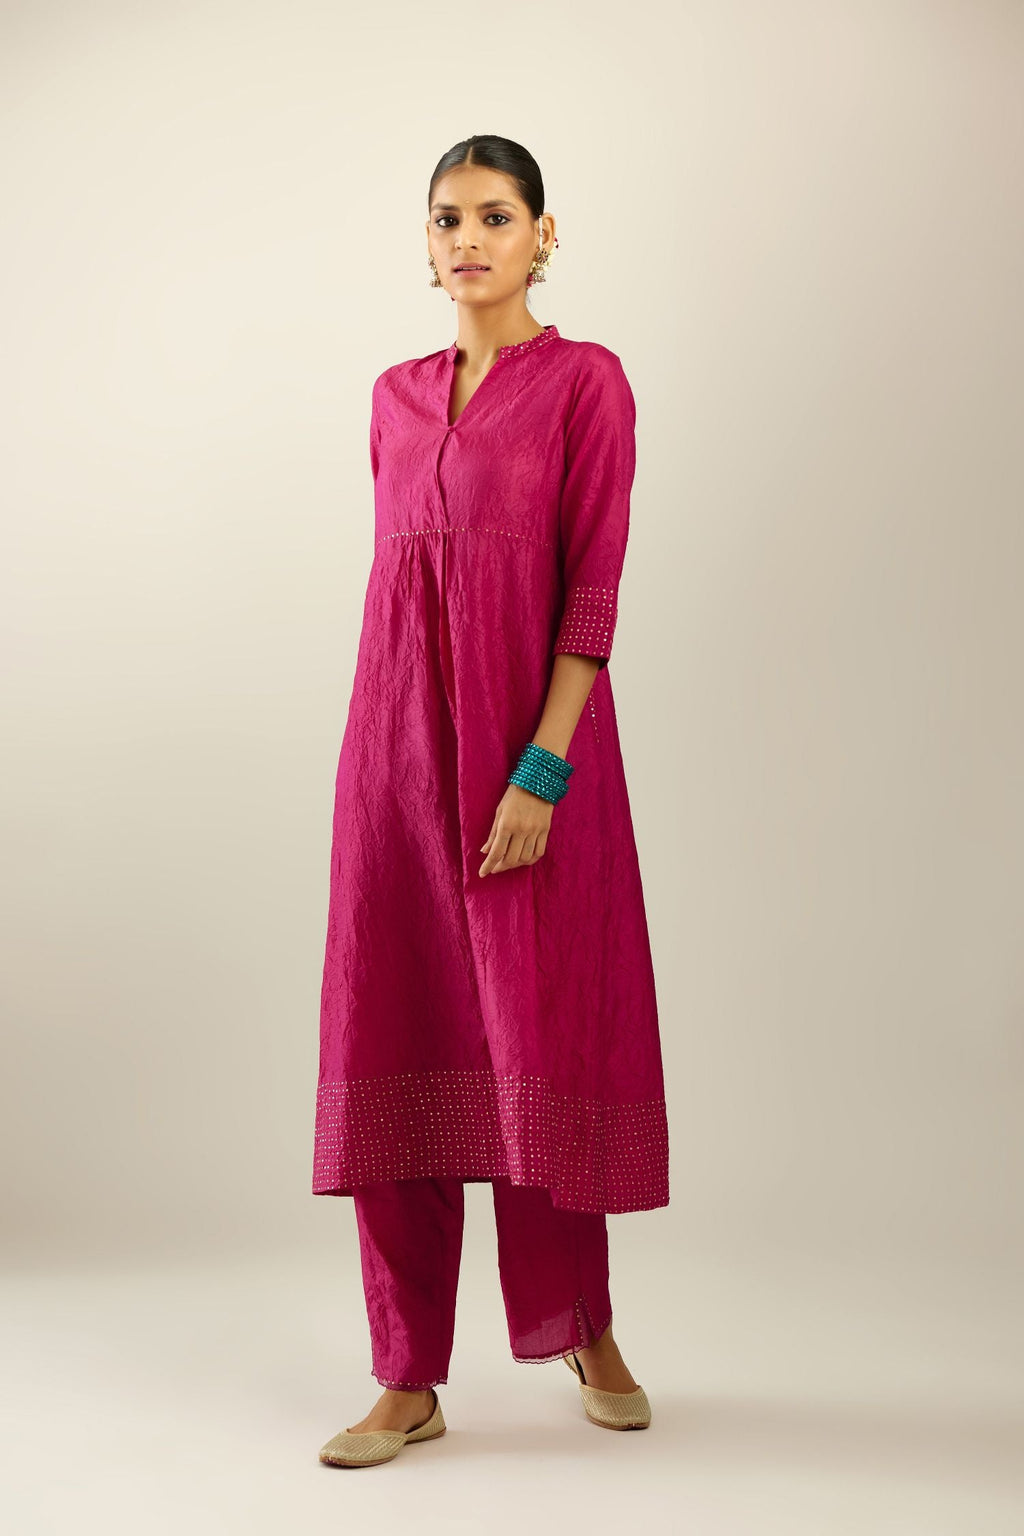 Jazzberry jam silk hand crushed kurta, highlighted with sequins.